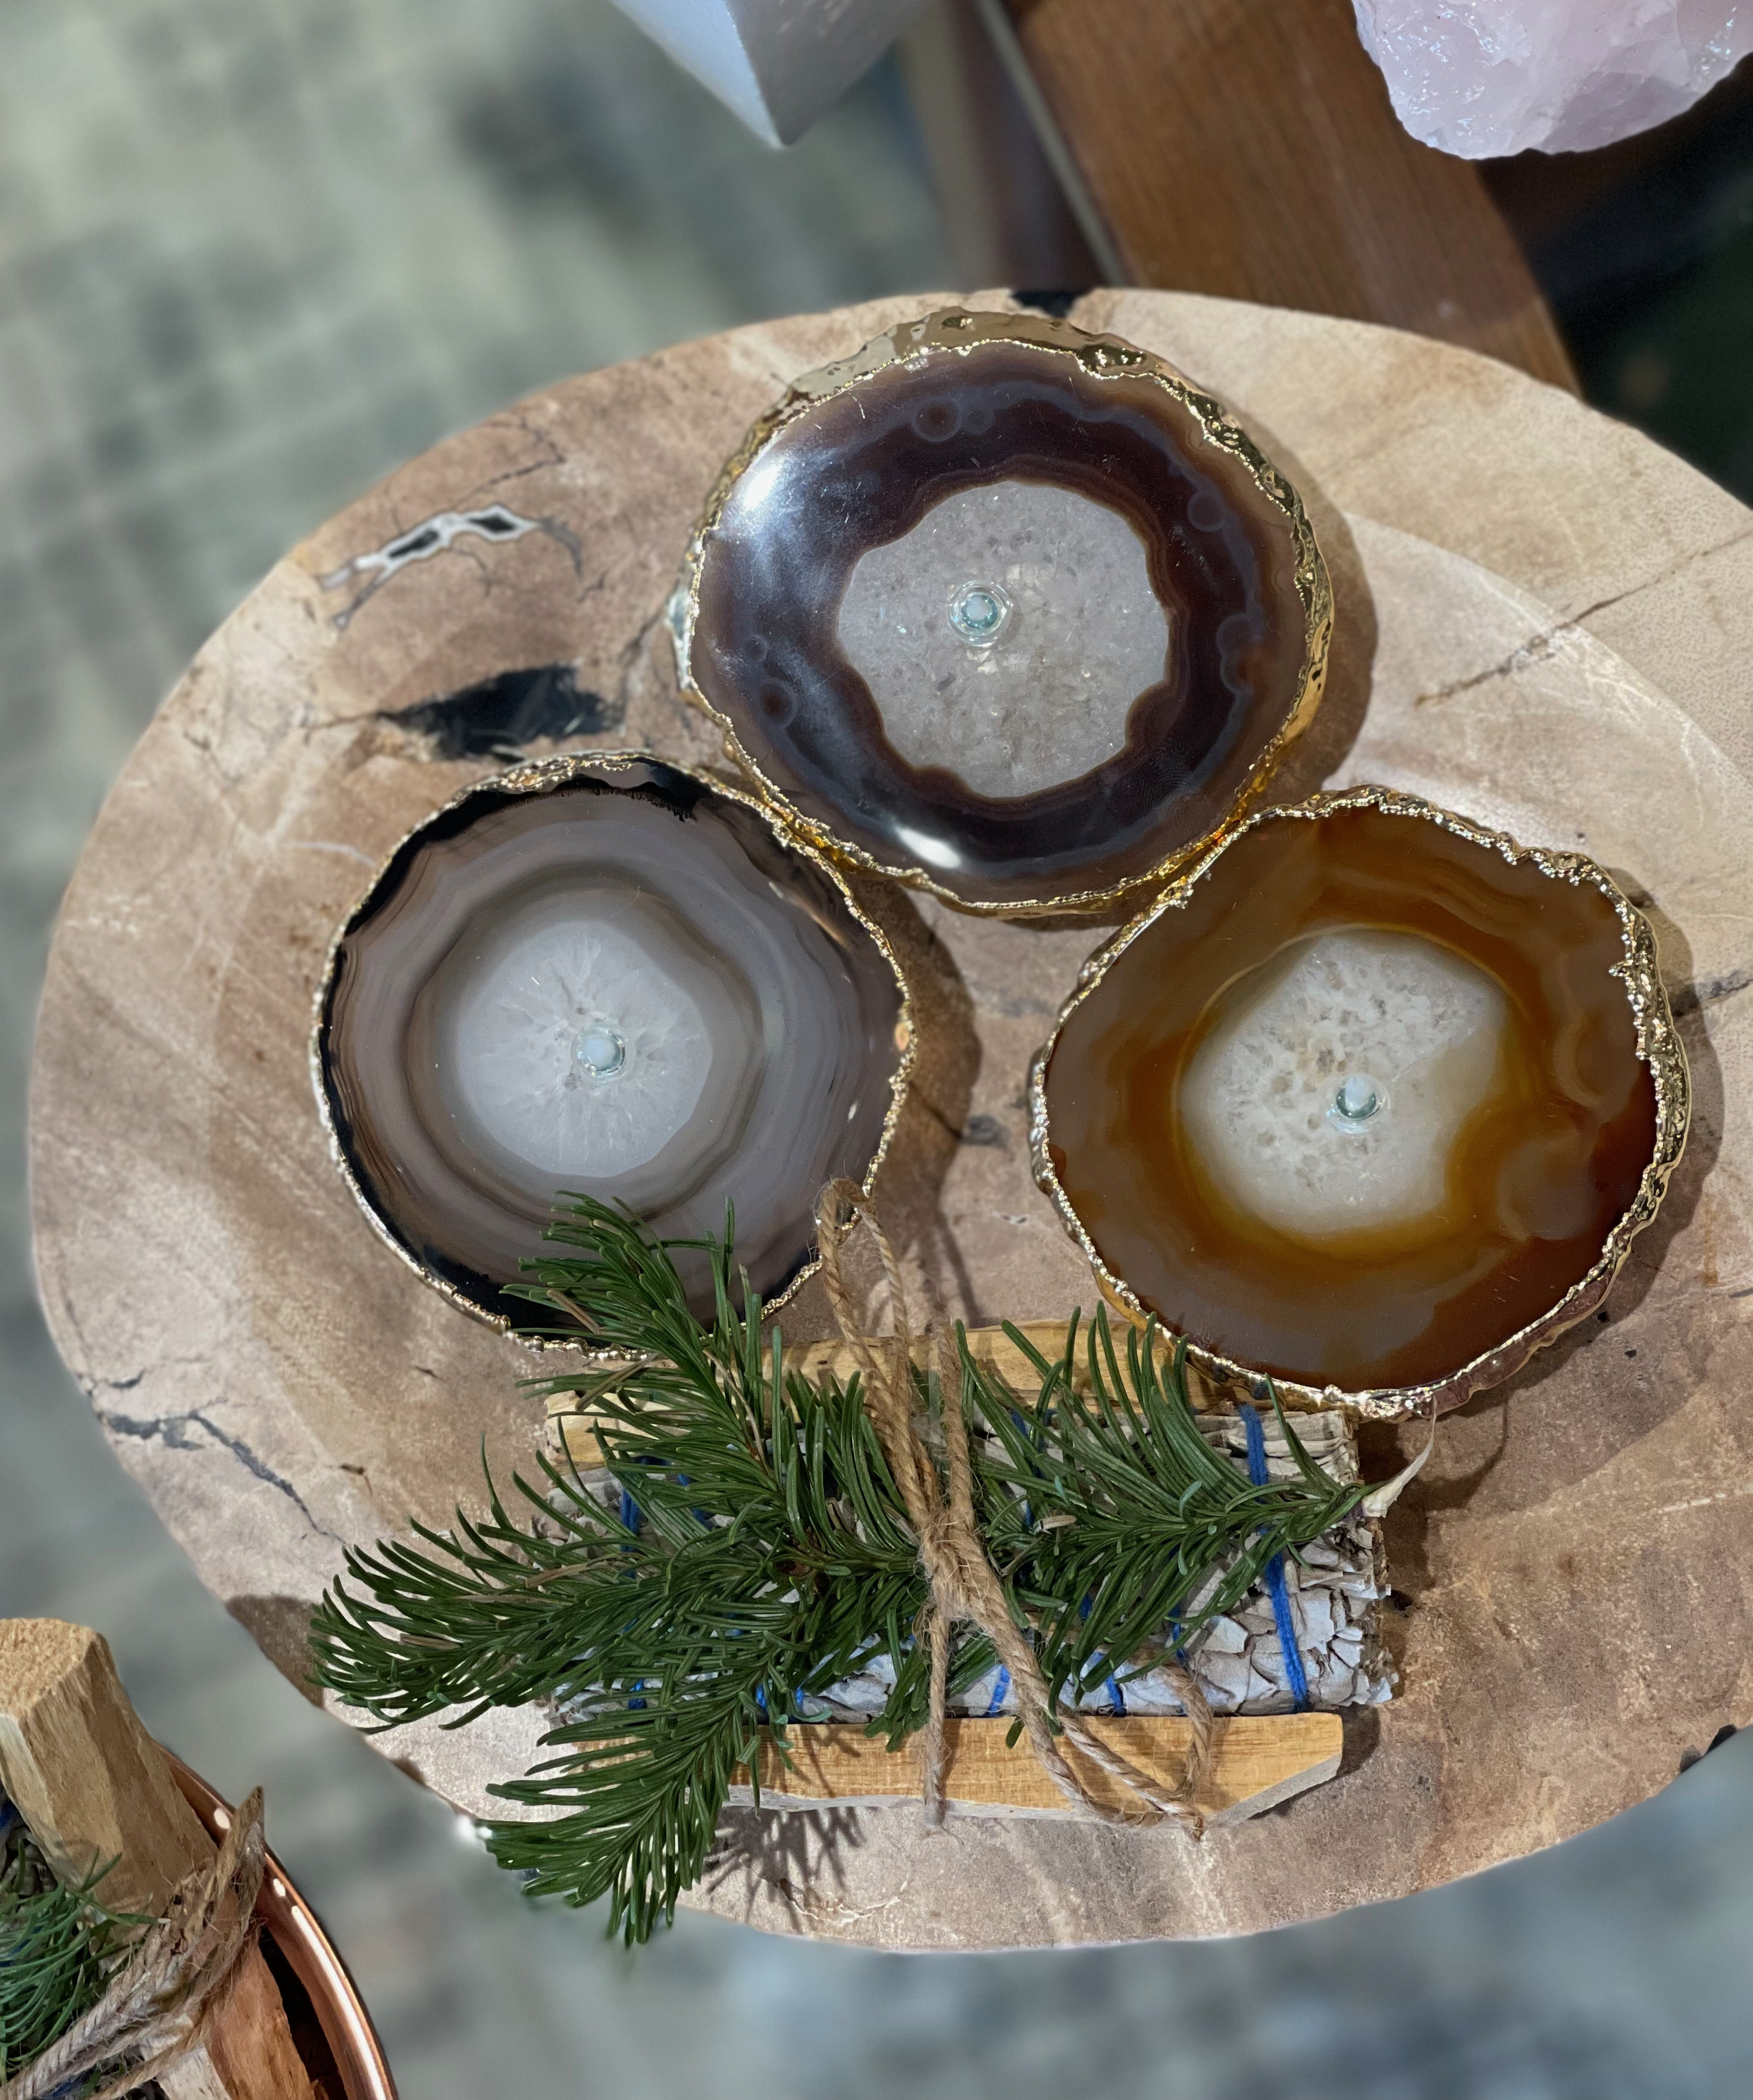 Agate Floating Oil Candle – The Burning Stones